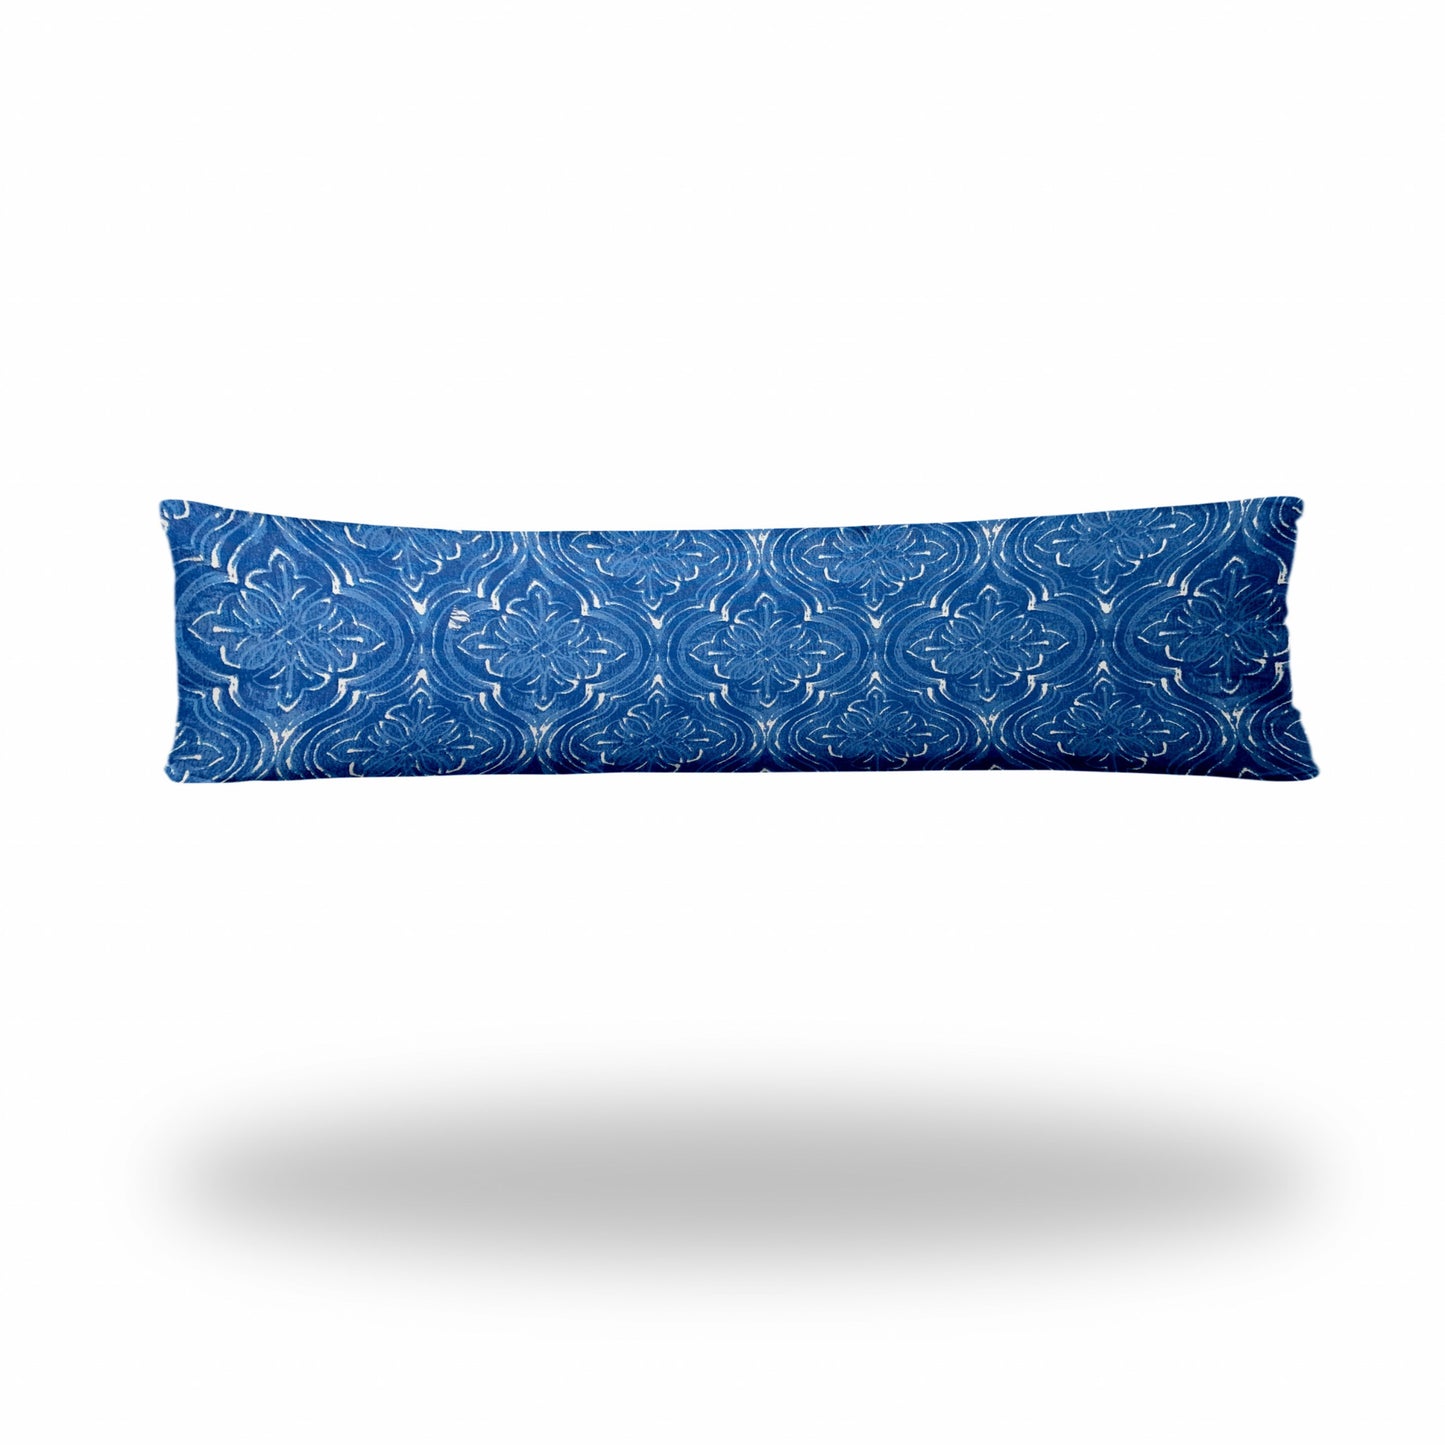 12" X 48" Blue And White Enveloped Ogee Lumbar Indoor Outdoor Pillow Cover